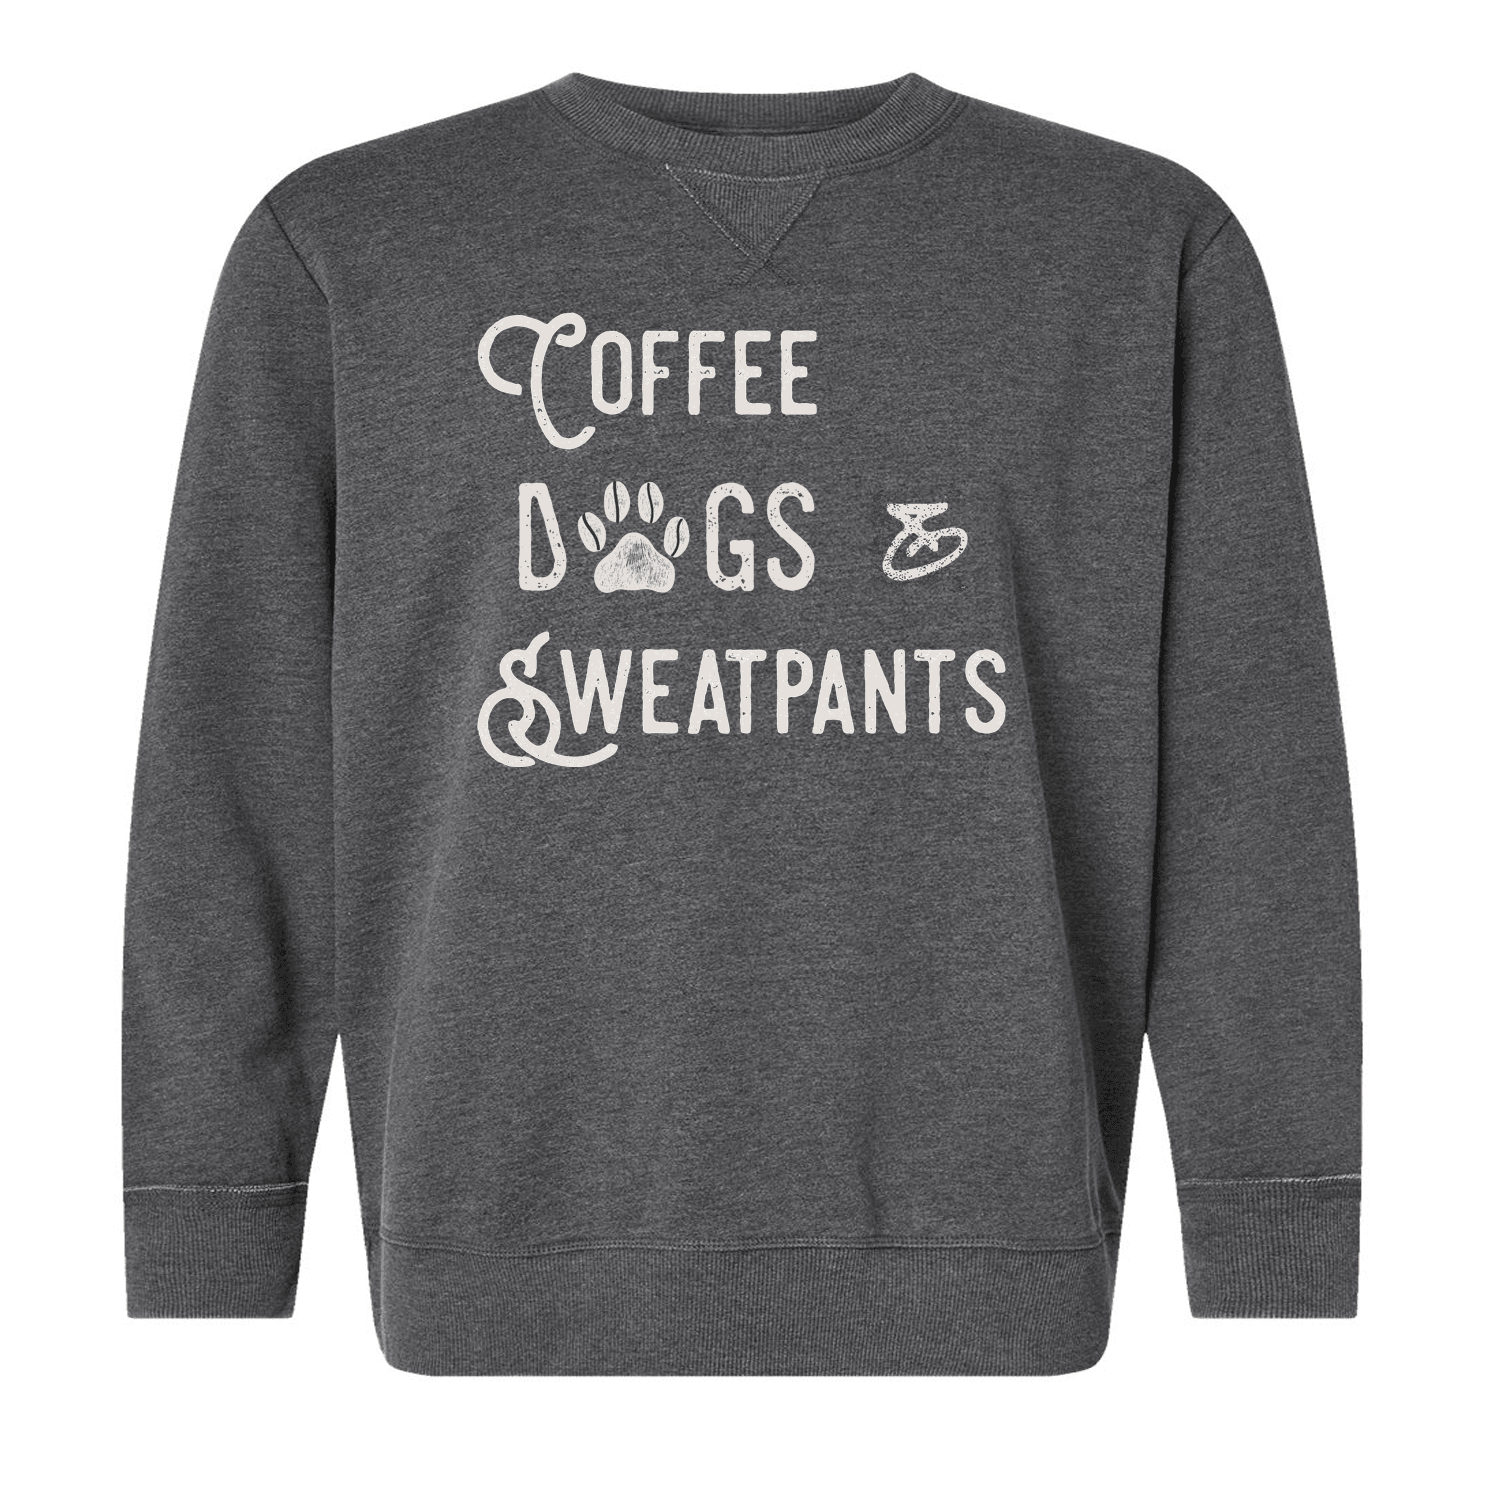 Coffee, Dogs, and Sweatpants Sweatshirt - Ales to Trails